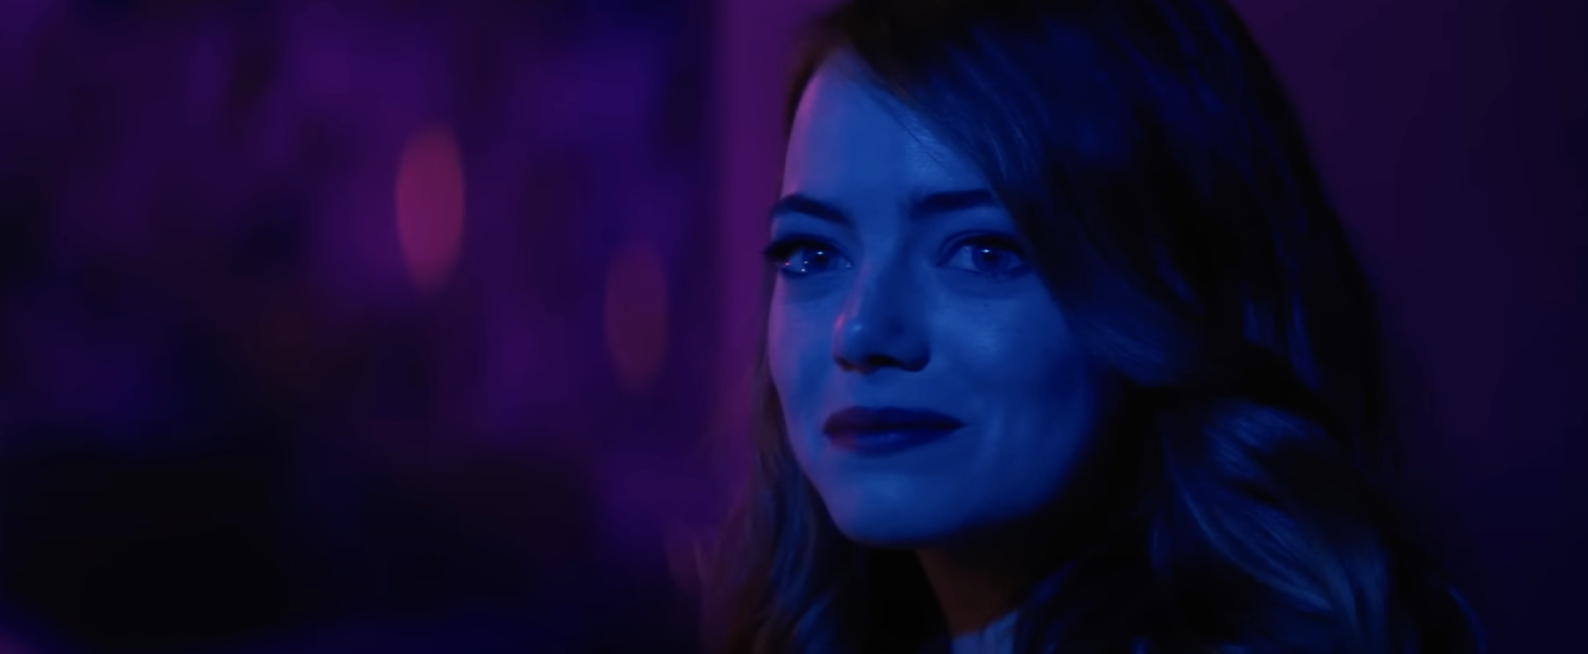 A woman in blue lighting smiles at someone off screen